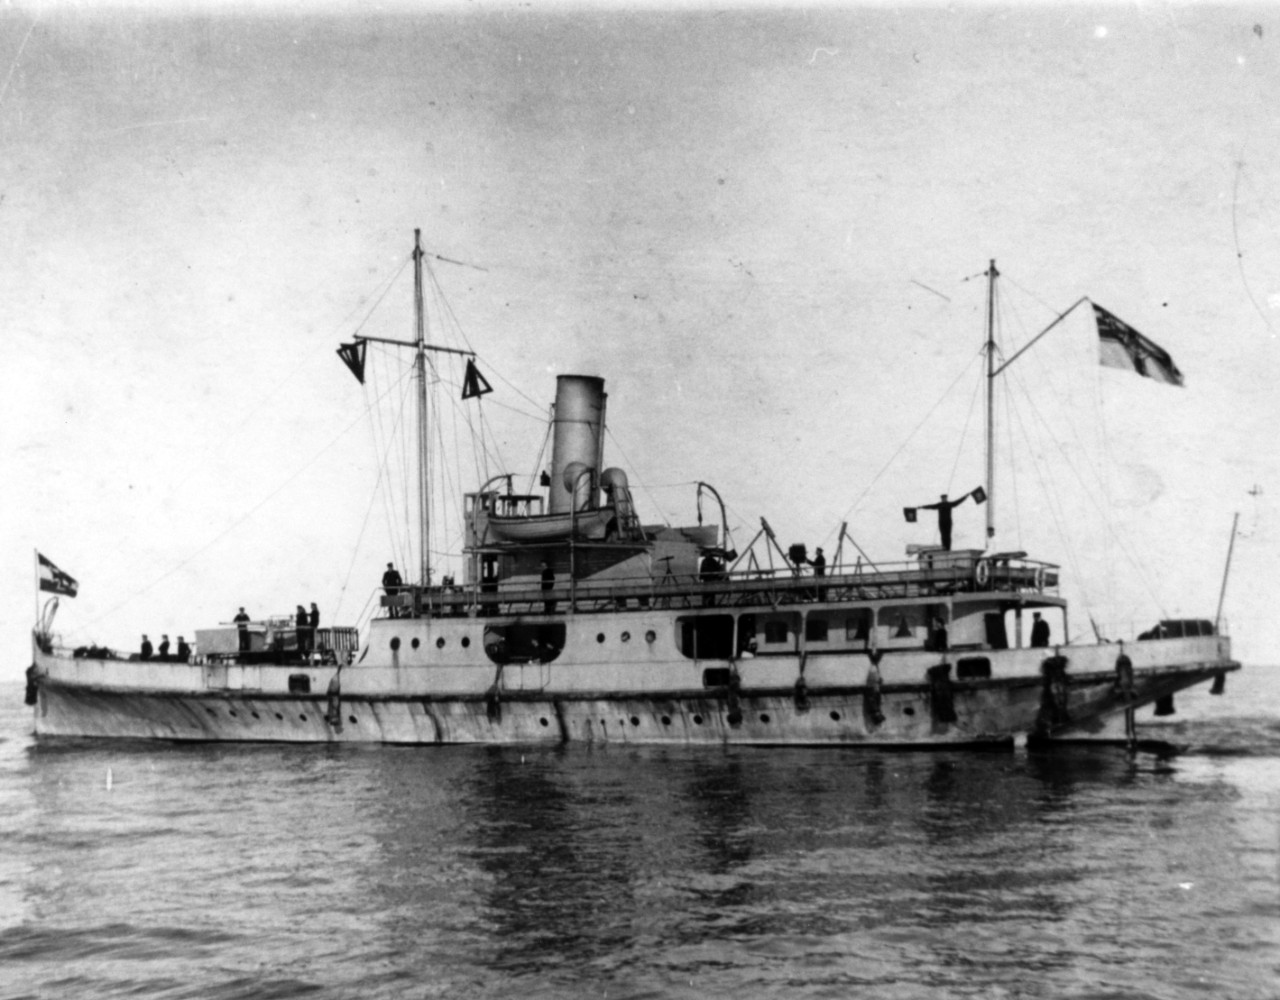 German Navy small auxiliary vessel, about 1915-1916.